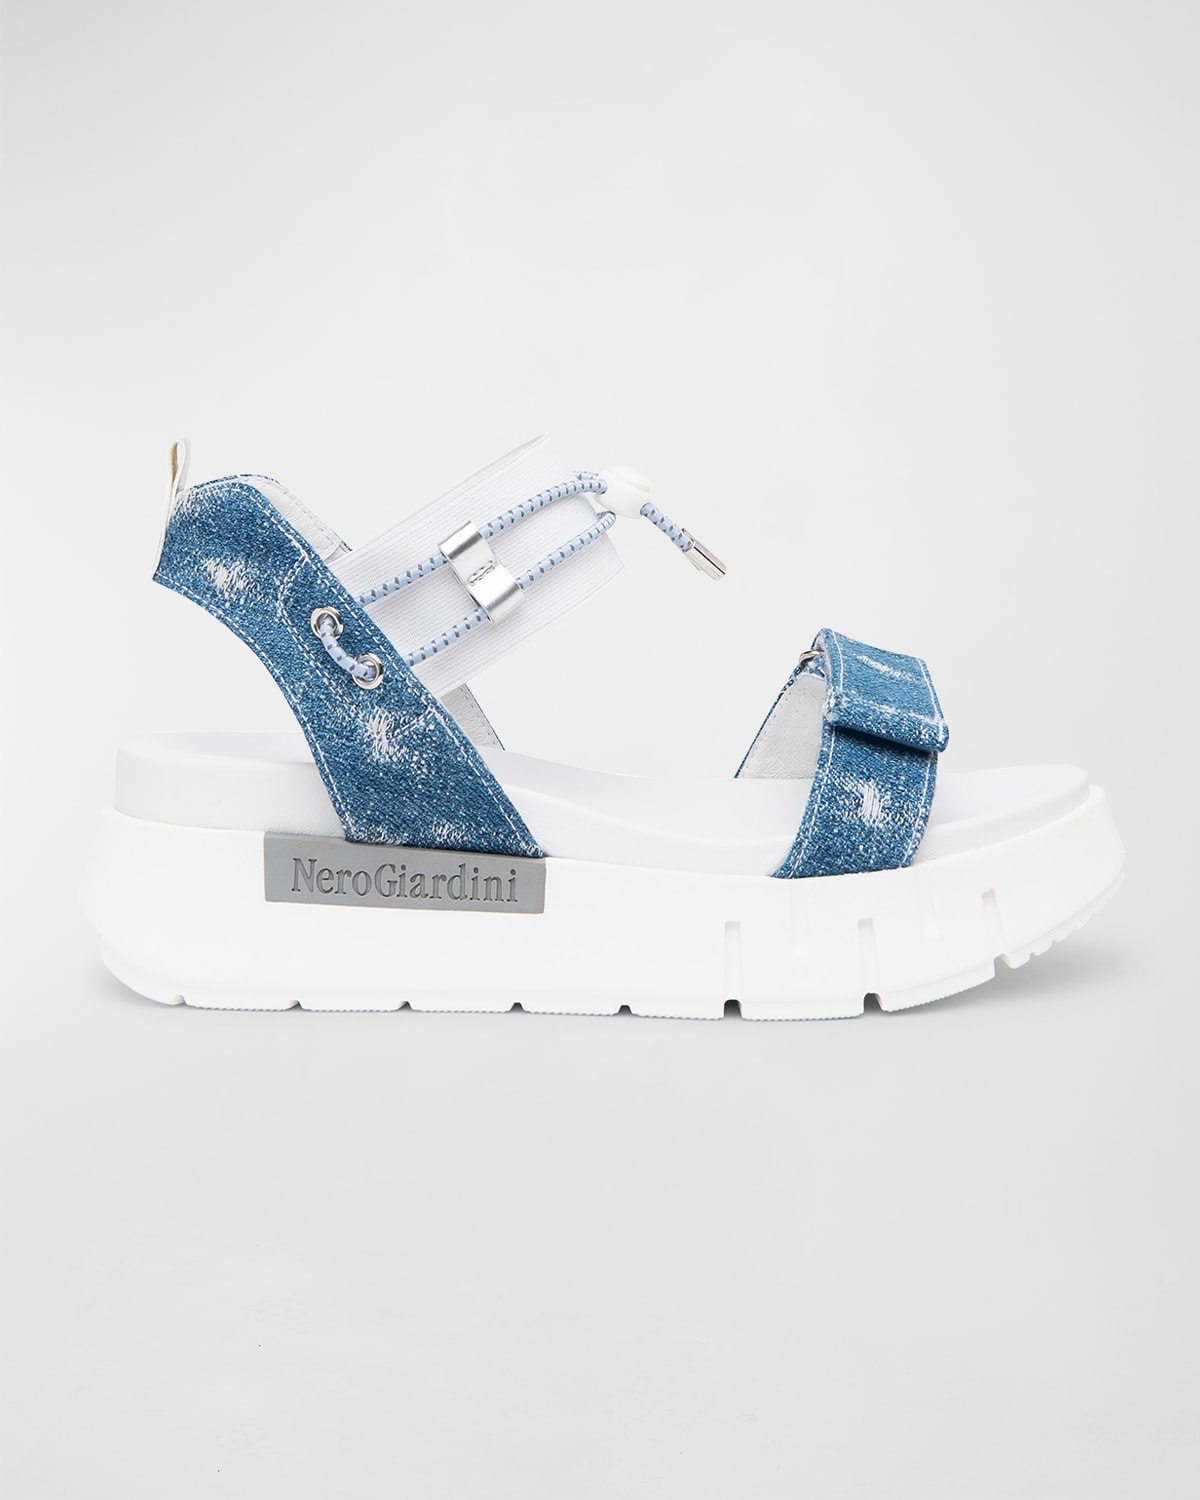 Bungee Sporty Sandals